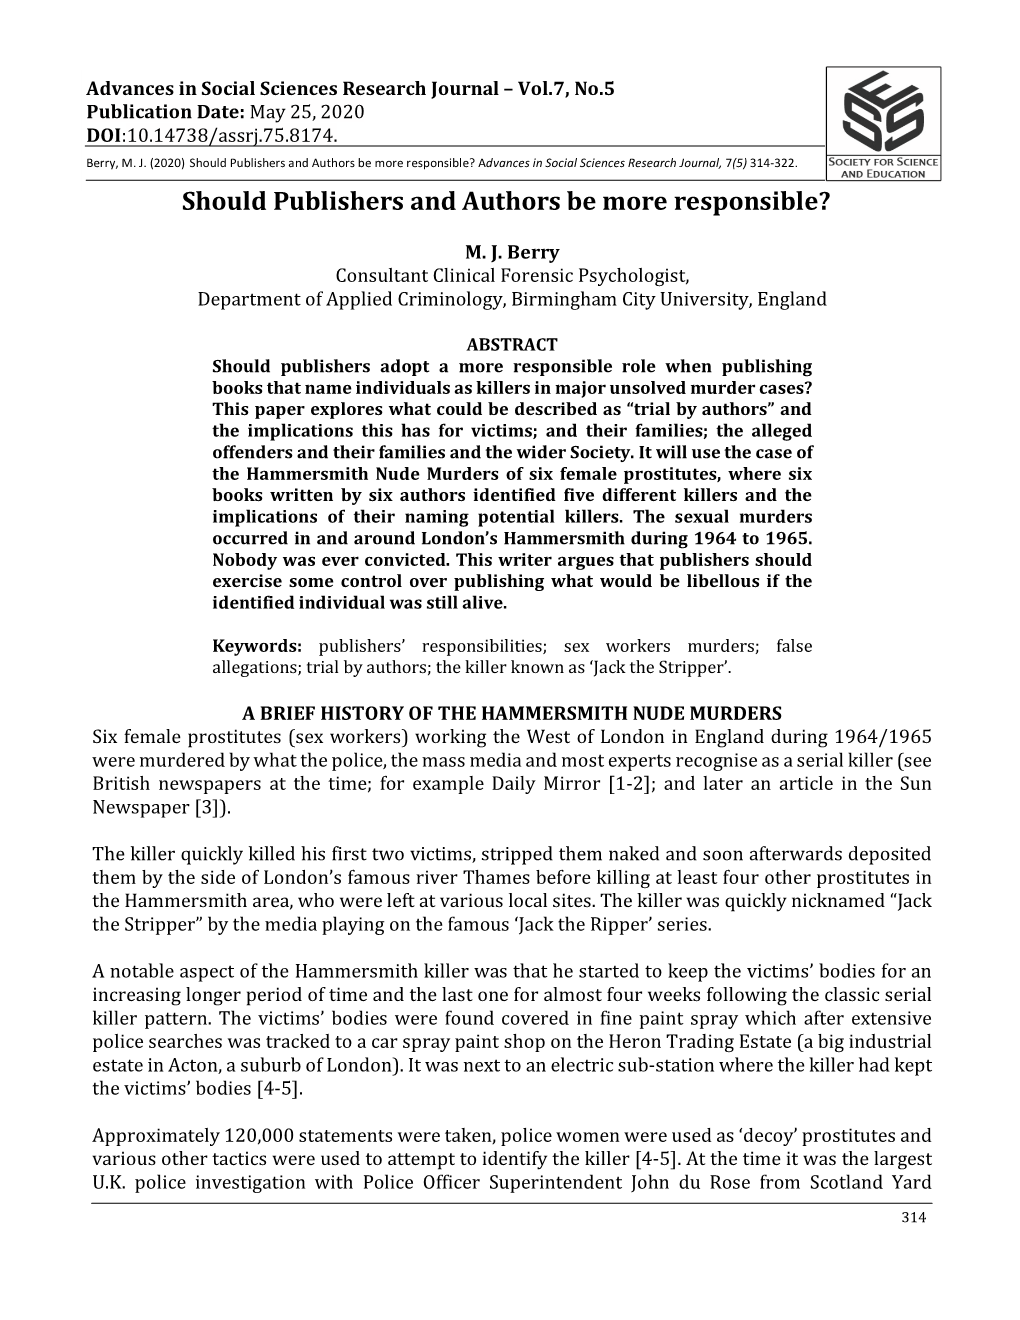 Should Publishers and Authors Be More Responsible? Advances in Social Sciences Research Journal, 7(5) 314-322